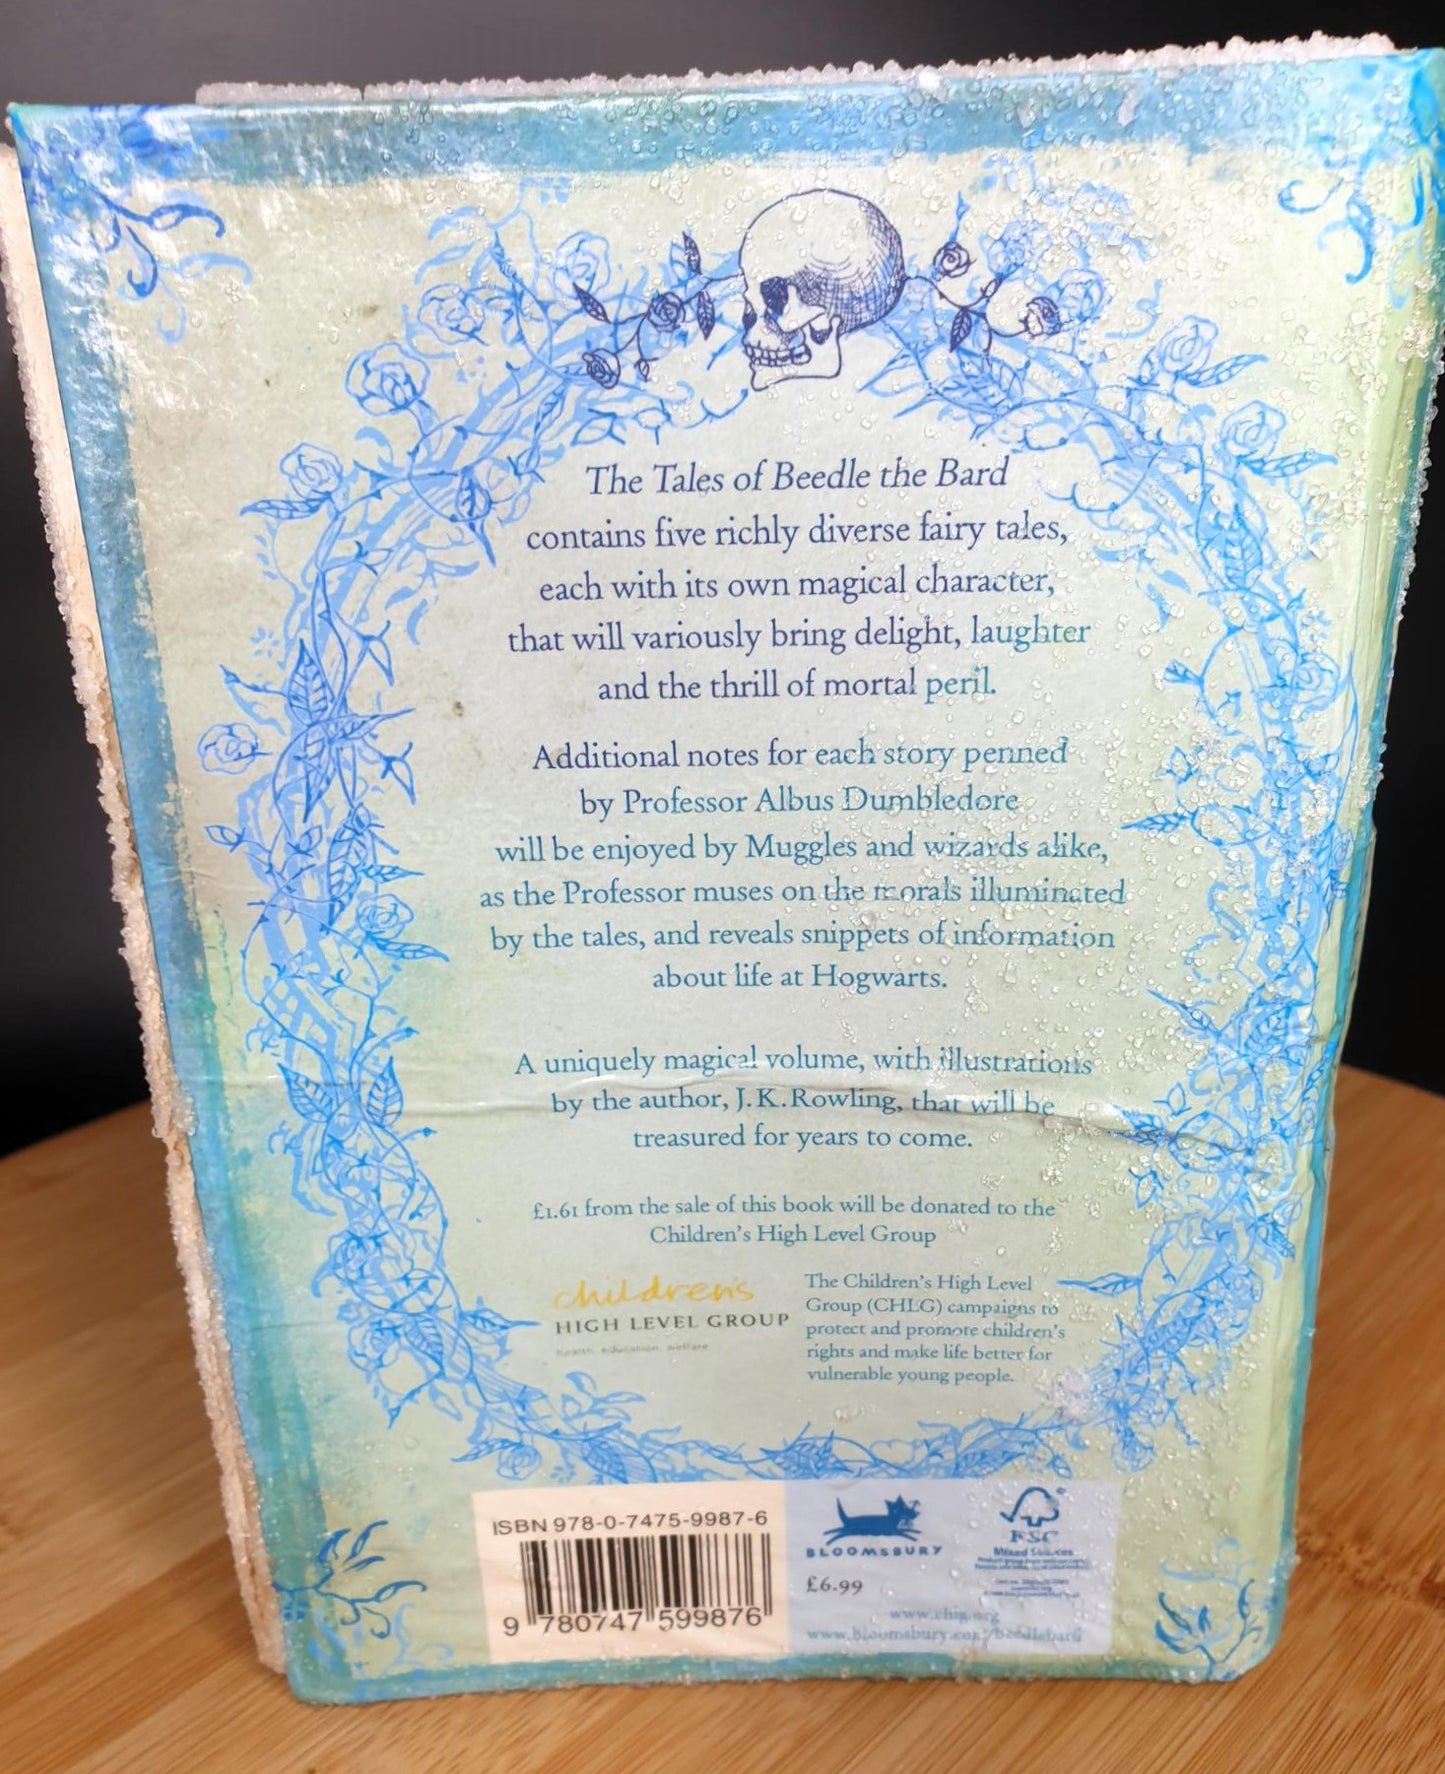 'The Tales of Beedle the Bard' By J. K. Rowling